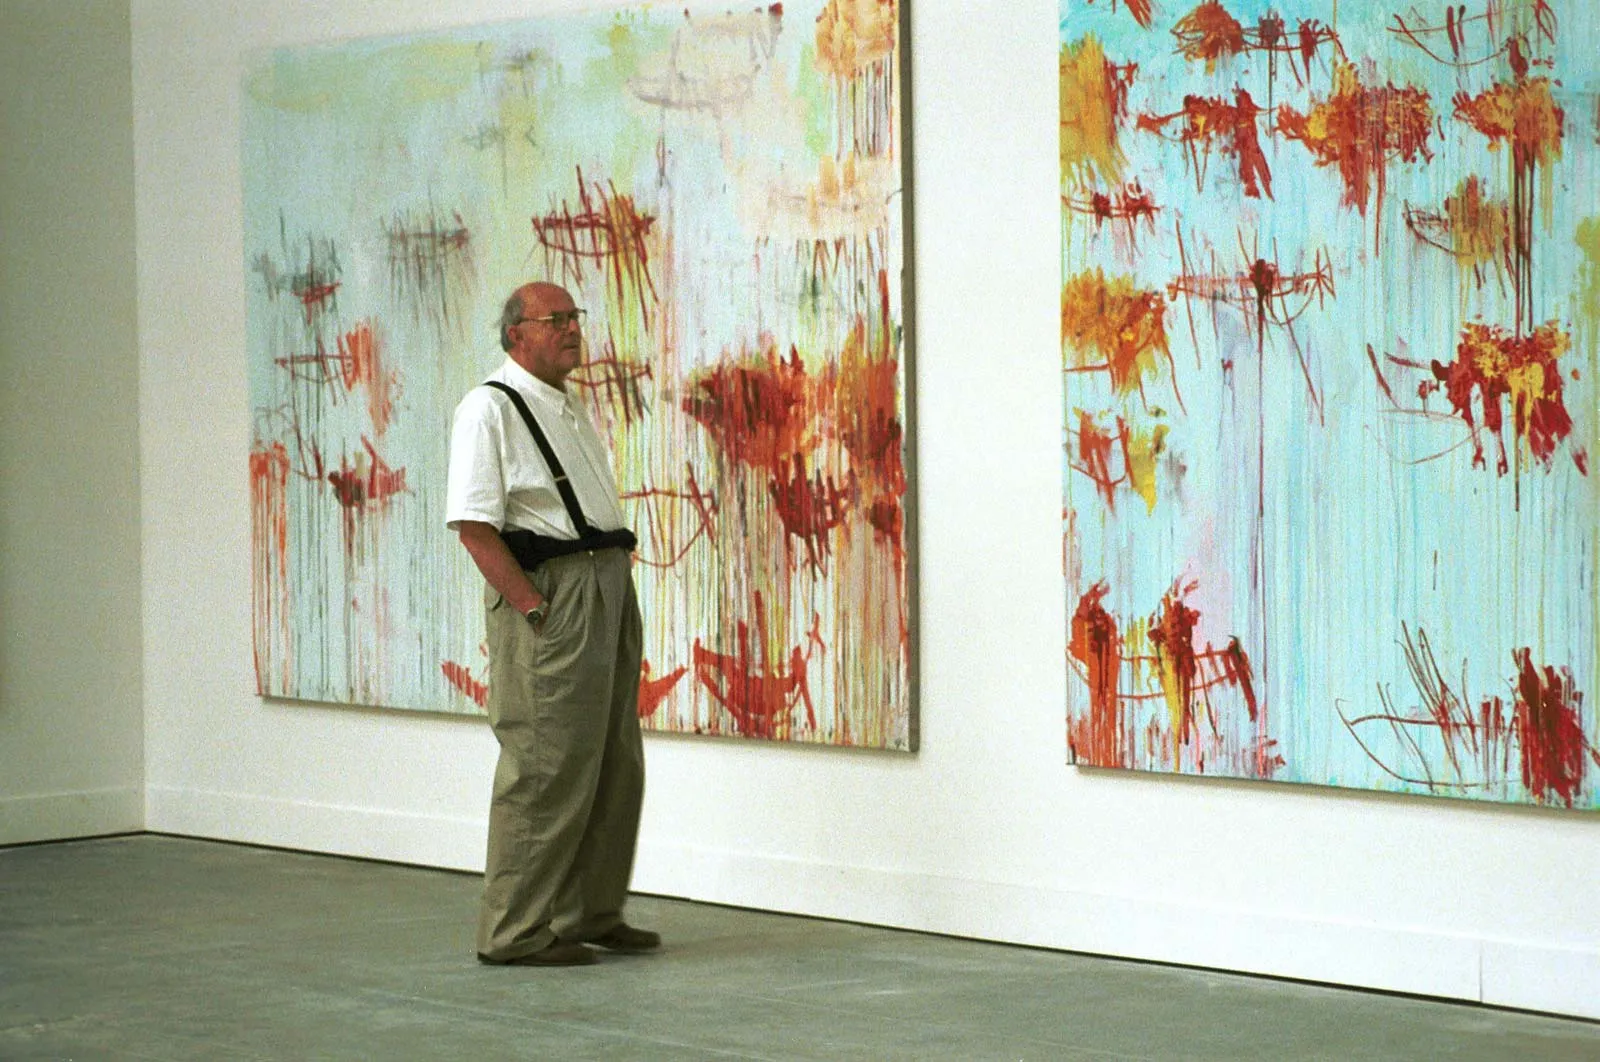 Cy Twombly painted…red squiggles?